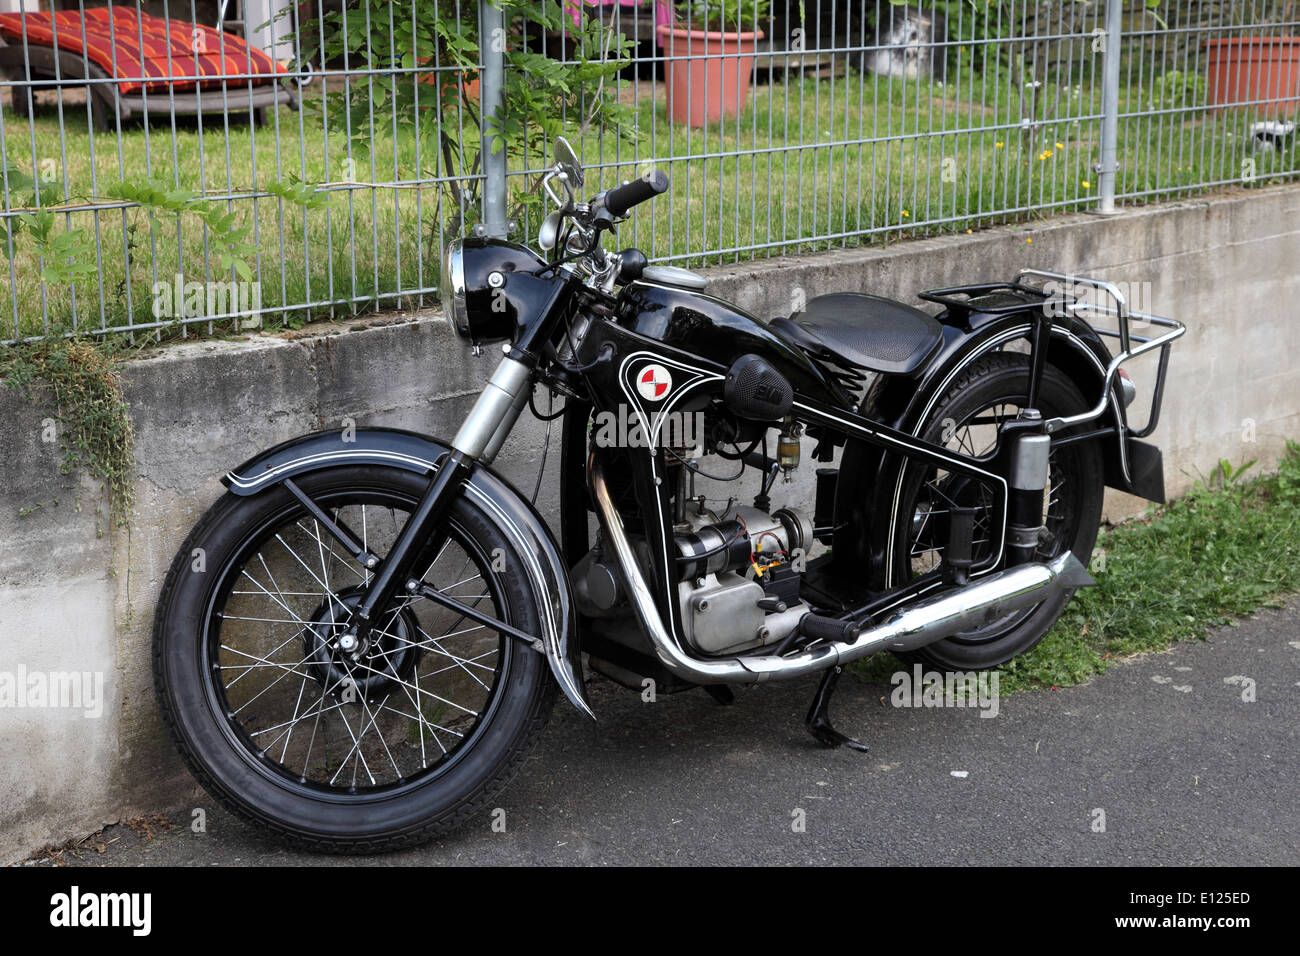 Historic BMW R35 motorcycle from ca. 1940 Stock Photo